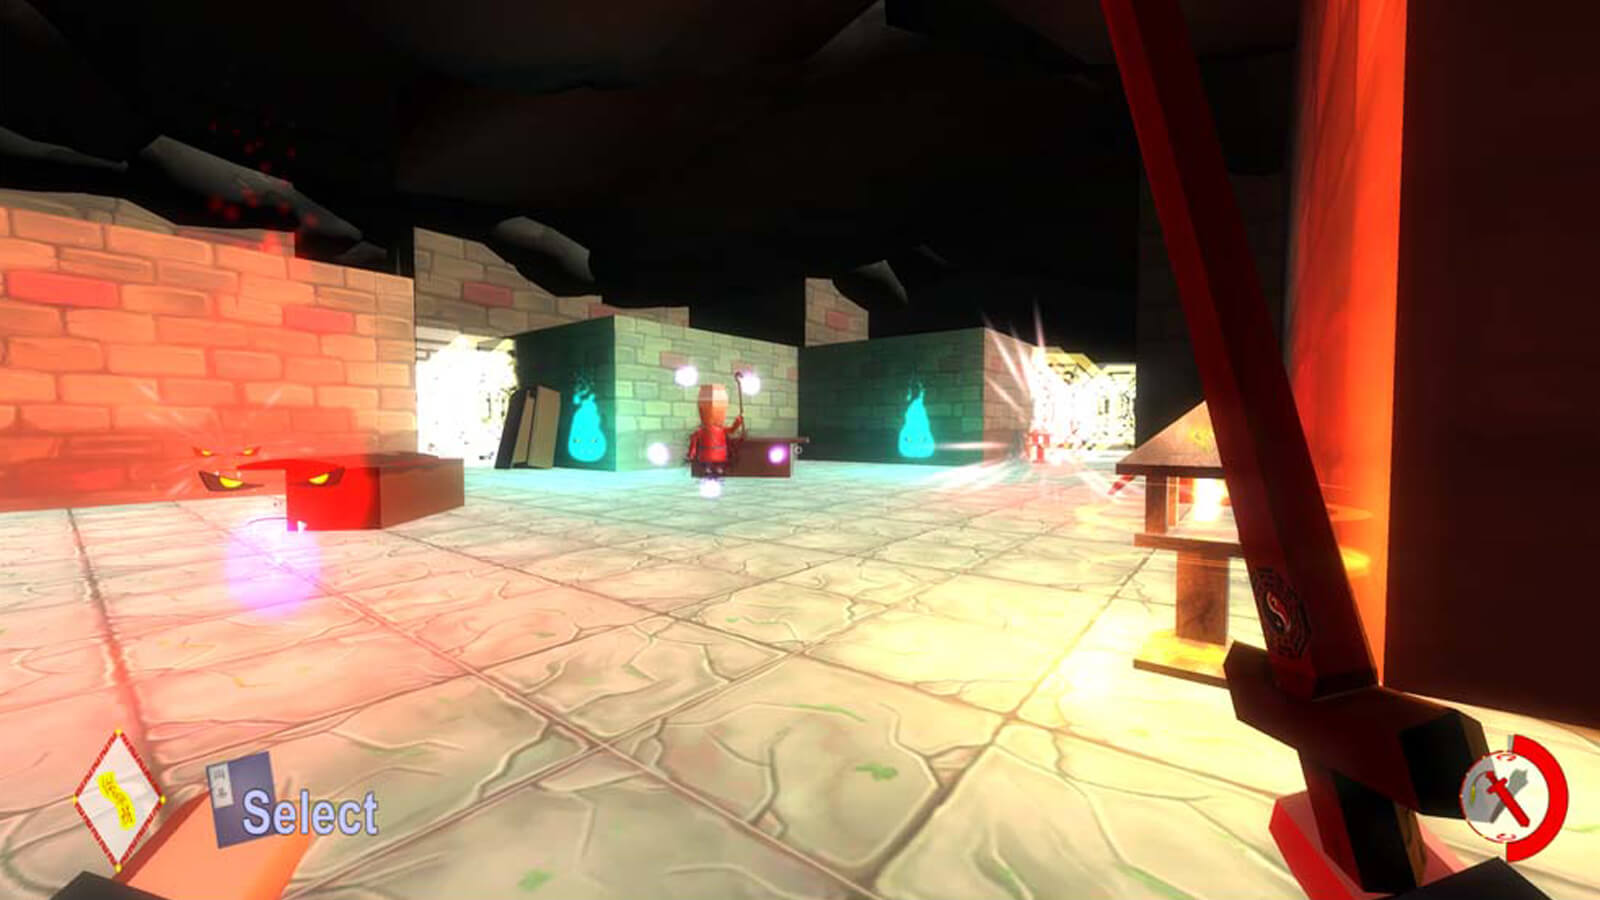 In first-person view, an enemy stands ahead surrounded by floating pink spheres and aqua flame balls